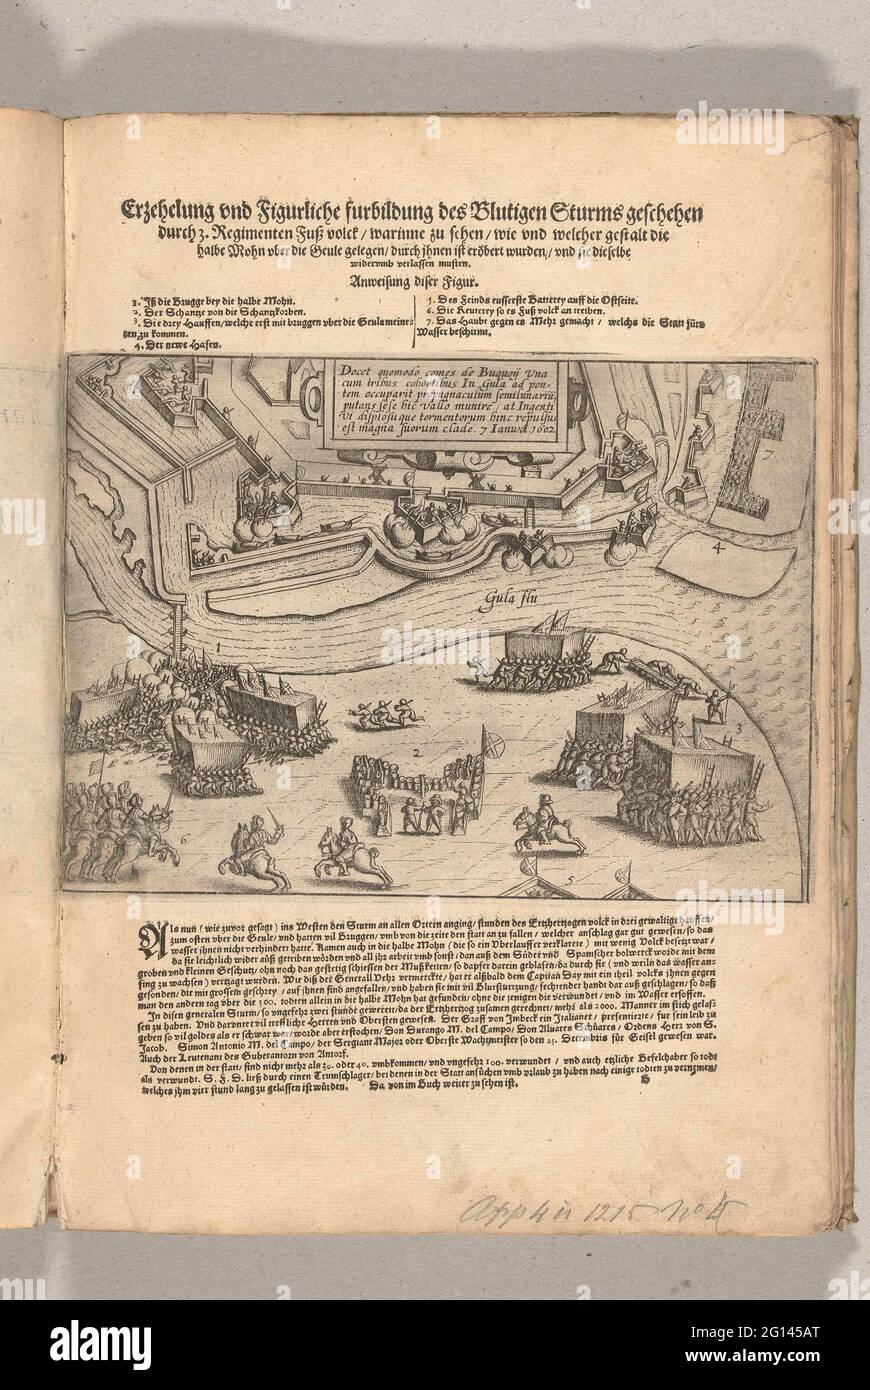 Siege in Ostend: Storming by Bucquoy on January 7, 1602; Erzehelung und Figurliche Furbildung des Blutigen Sturms Geefhen Durch 3. Regiments Fuß Volck / Warinne zu Sehen / Who Und Weller Gestalt that blame Mohn Uber who wurden Geule / Durch Inhen Eröbert Wurden / und Sie Dieselbe Widerumb mues. Storming the defenses of Ostend by the Spanish troops under the Count of Bucquoy on January 7, 1602. Bottom left battles at the Lunet on the other side of the Geule River, in the middle of a cartouche with inscription in Latin. Above the printing title with declaration of the figures, at the bottom of a Stock Photo